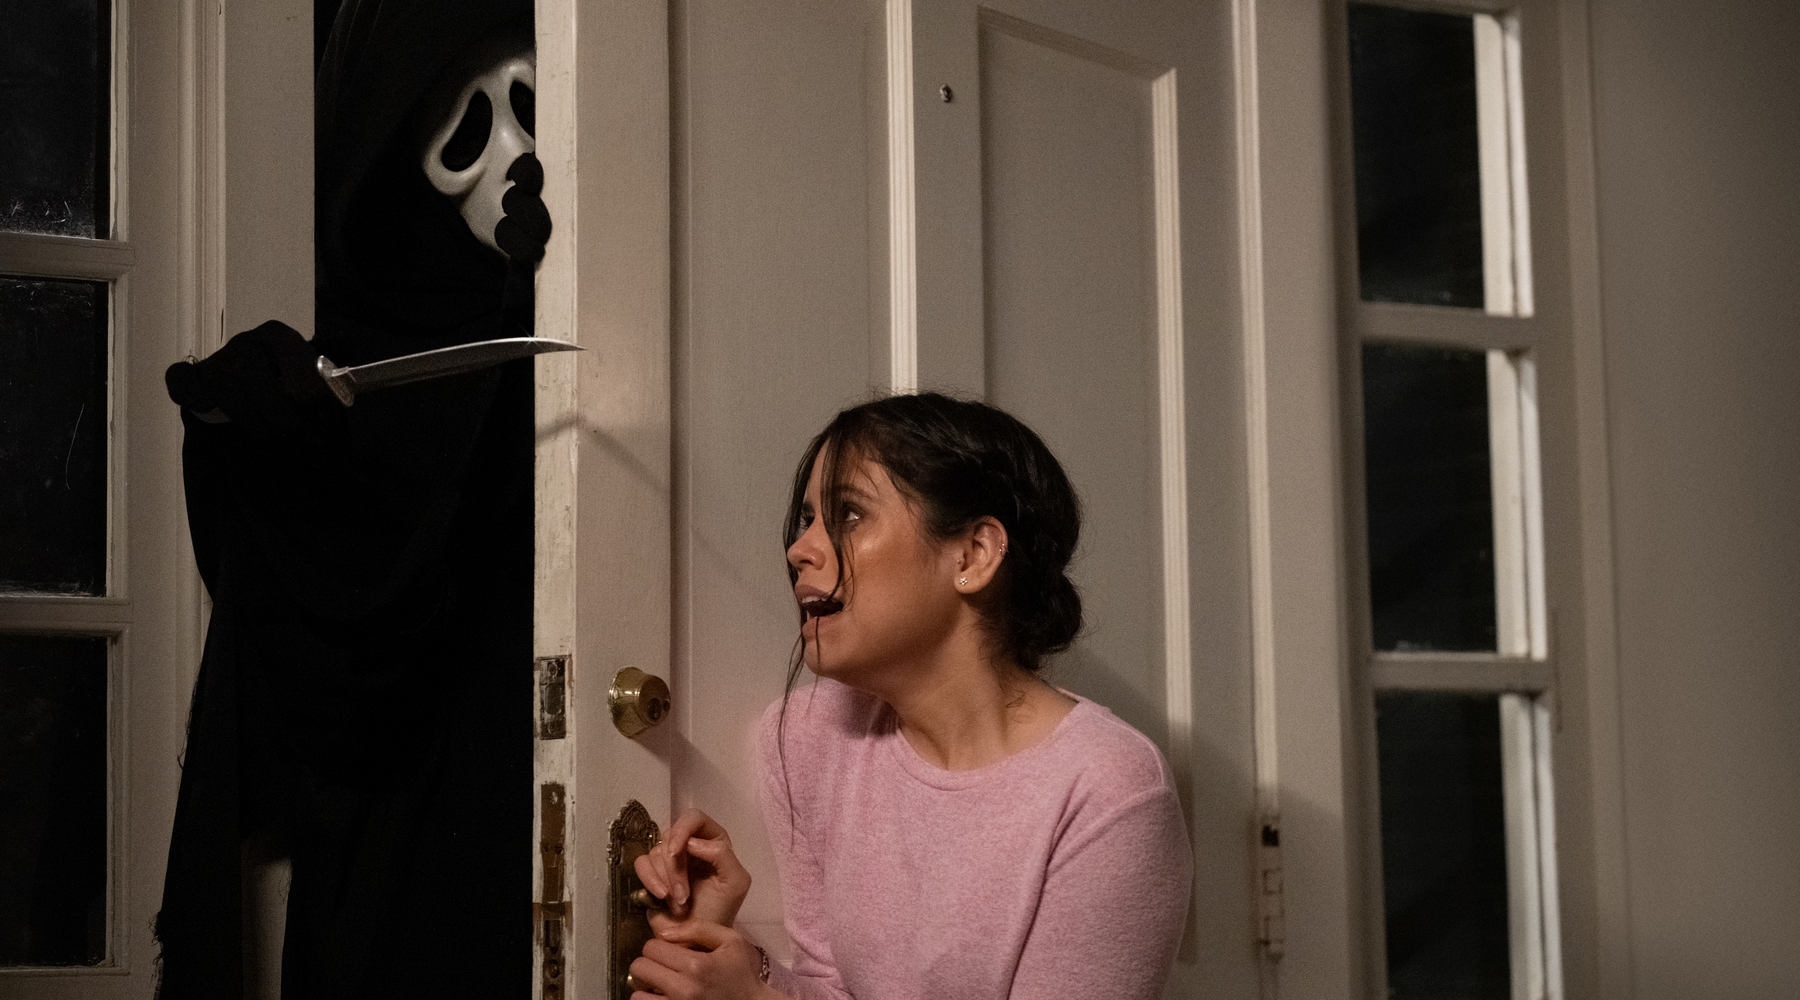 Scream 6' Ending Explained: Who Is Ghostface and What Do They Want?